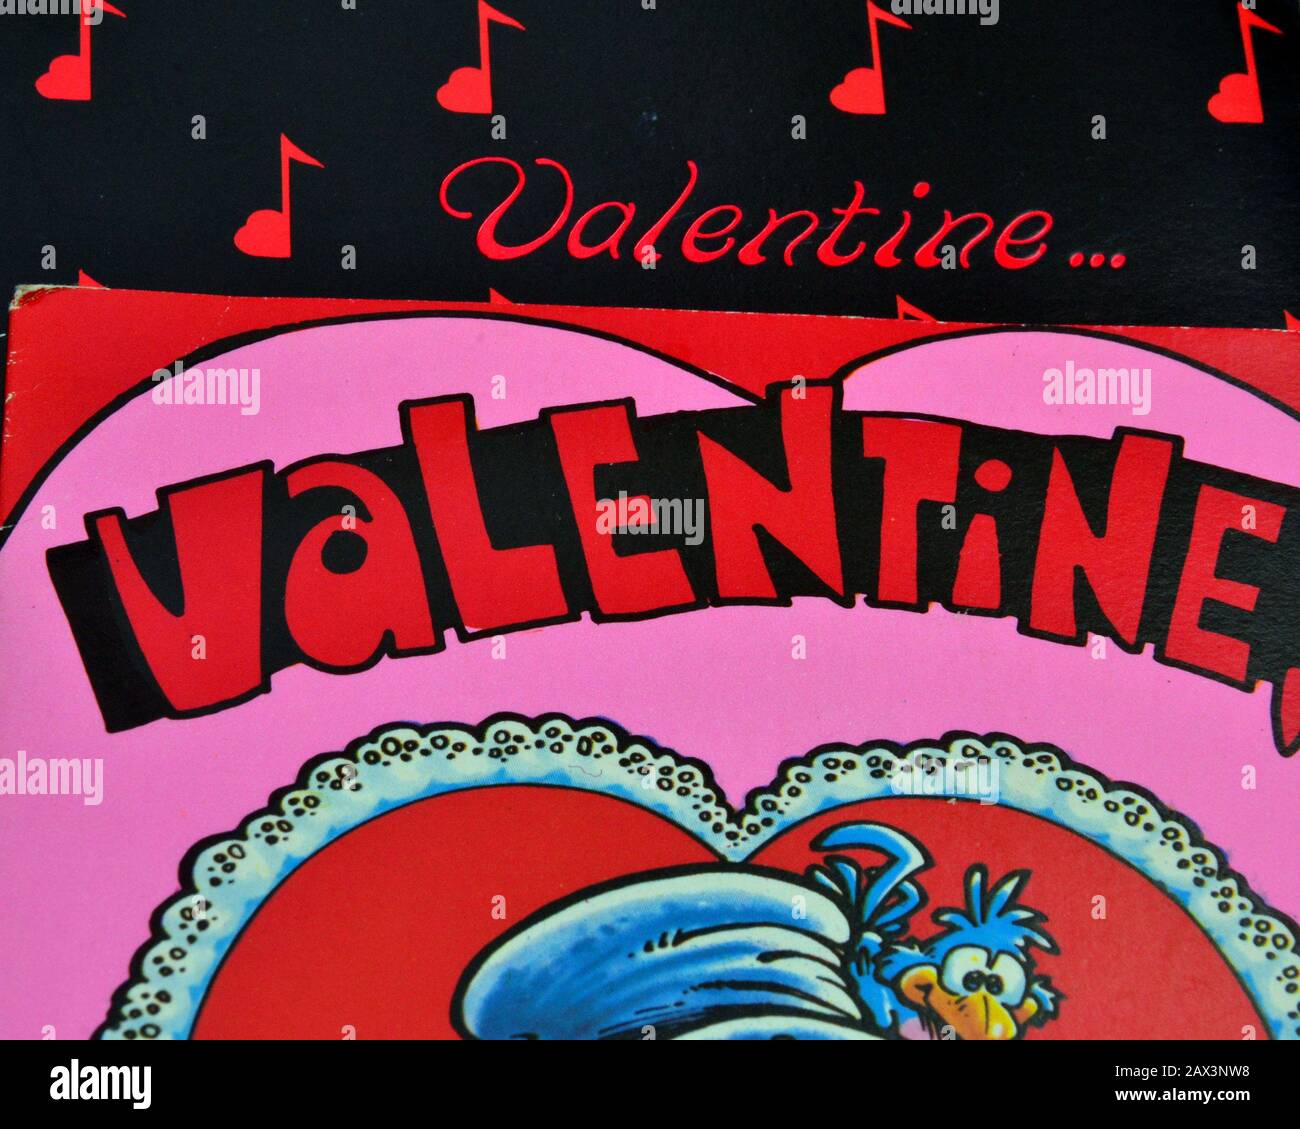 Details from the covers of two different Valentine's Day cards Stock Photo